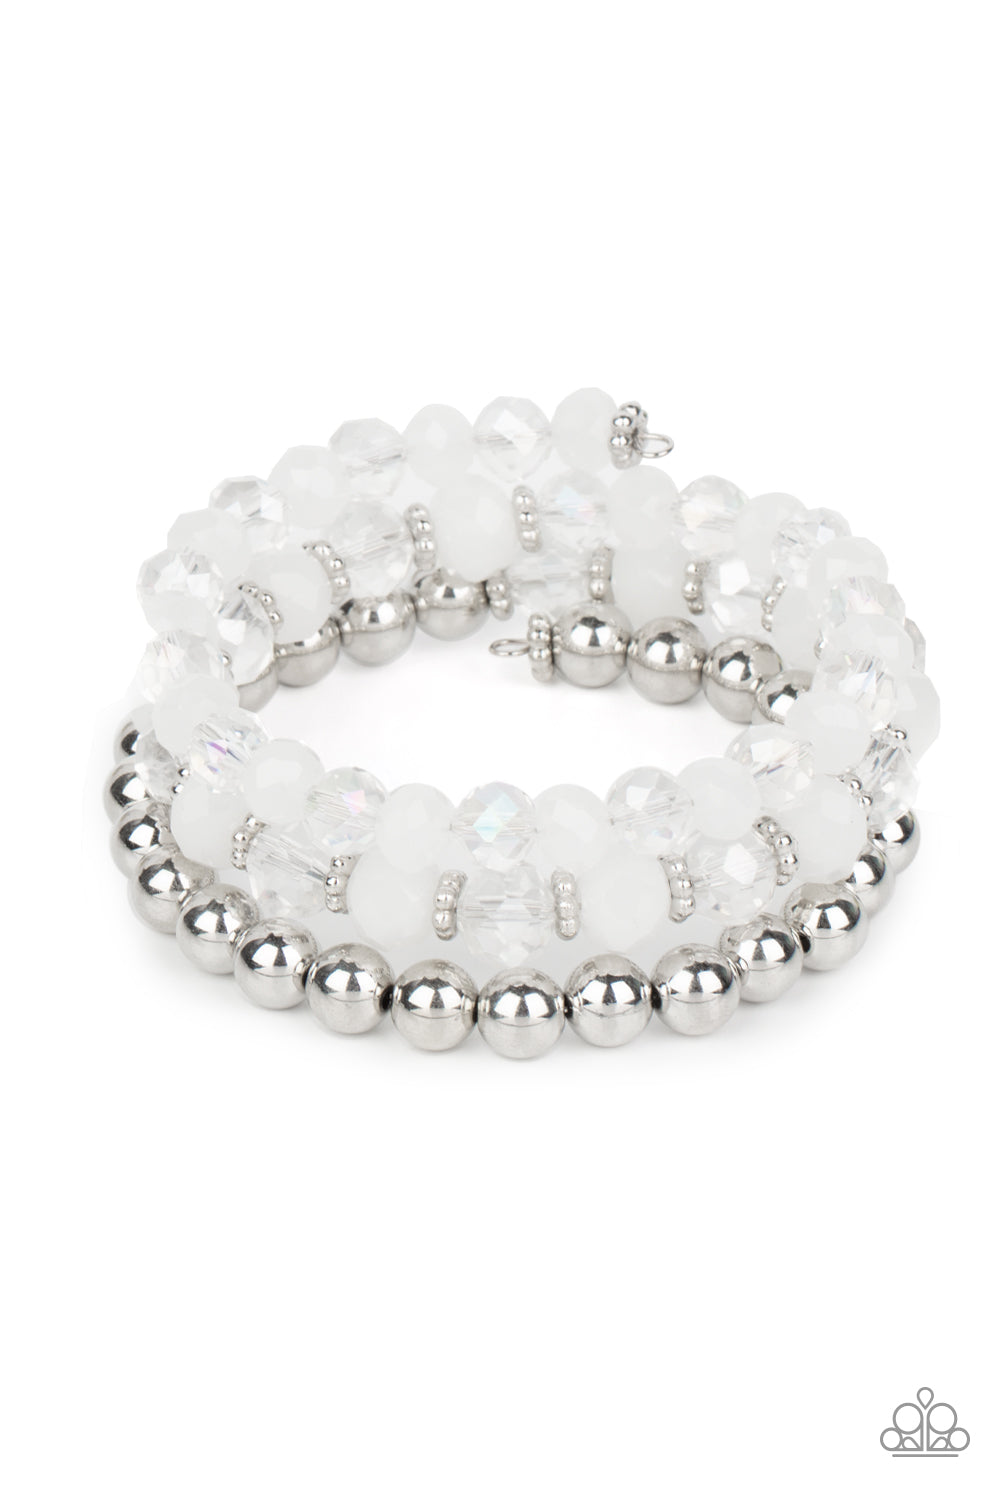 Paparazzi Gimme Gimme - White Bracelet - A Finishing Touch Jewelry